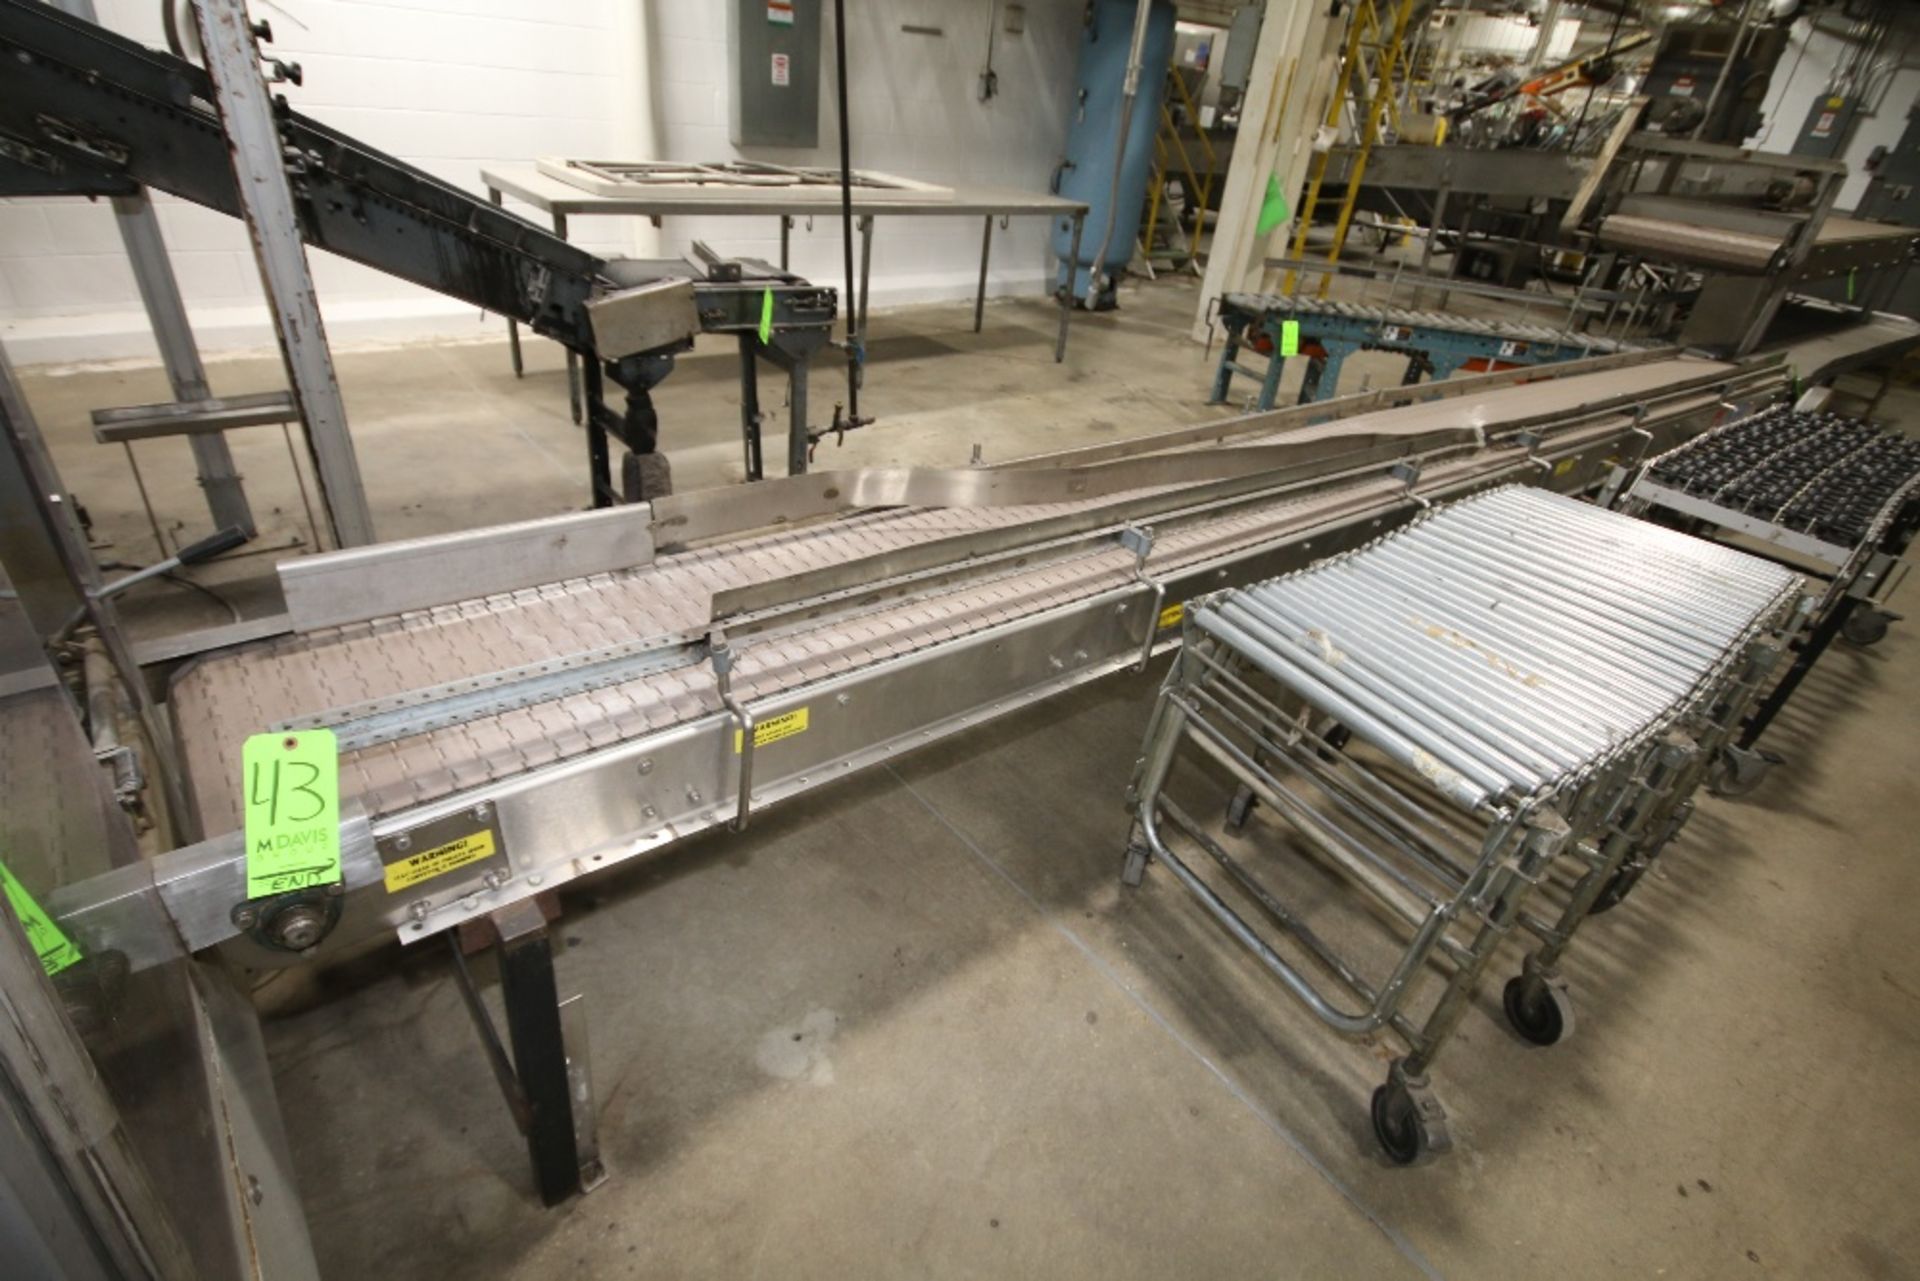 Hytrol S/S Product Conveyor, 18" W x 238" L Belt, Straigh Section - Image 2 of 3